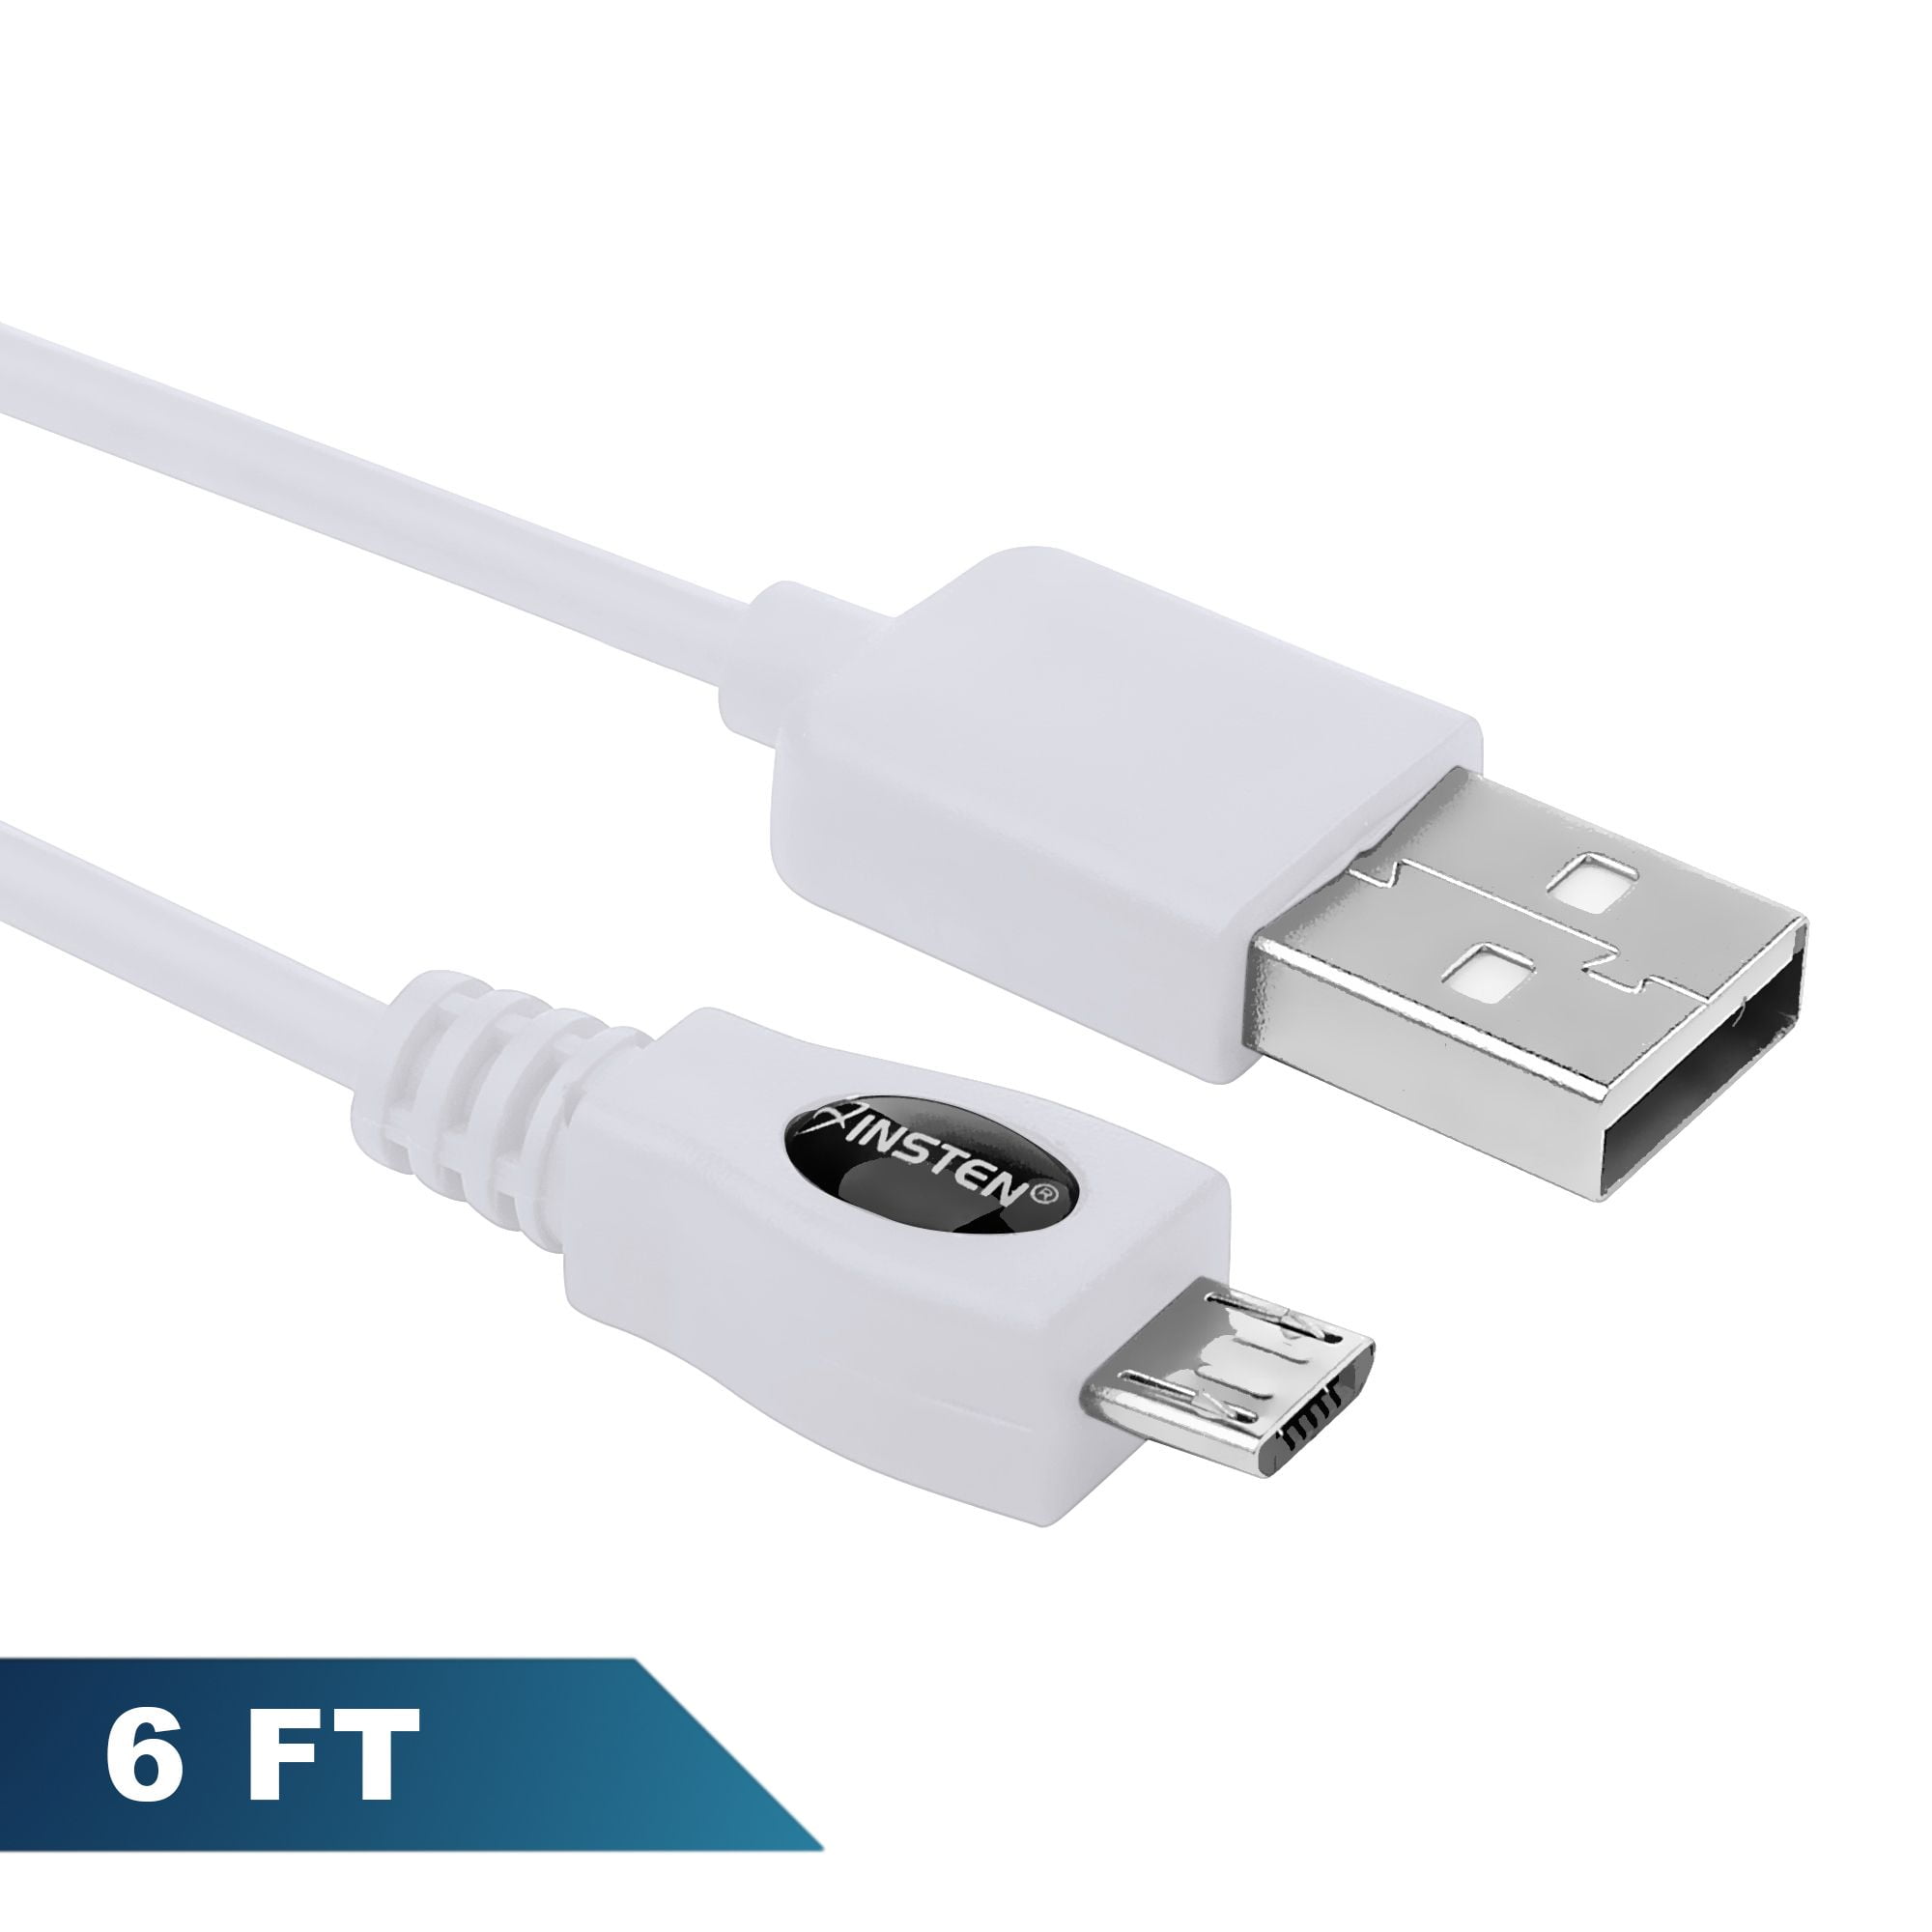 Insten 6 Ft Micro Usb Cable Data Sync Charger Cable Charging Cord 6ft For Android Samsung Smartphone Cell Phone White Walmart Com Walmart Com